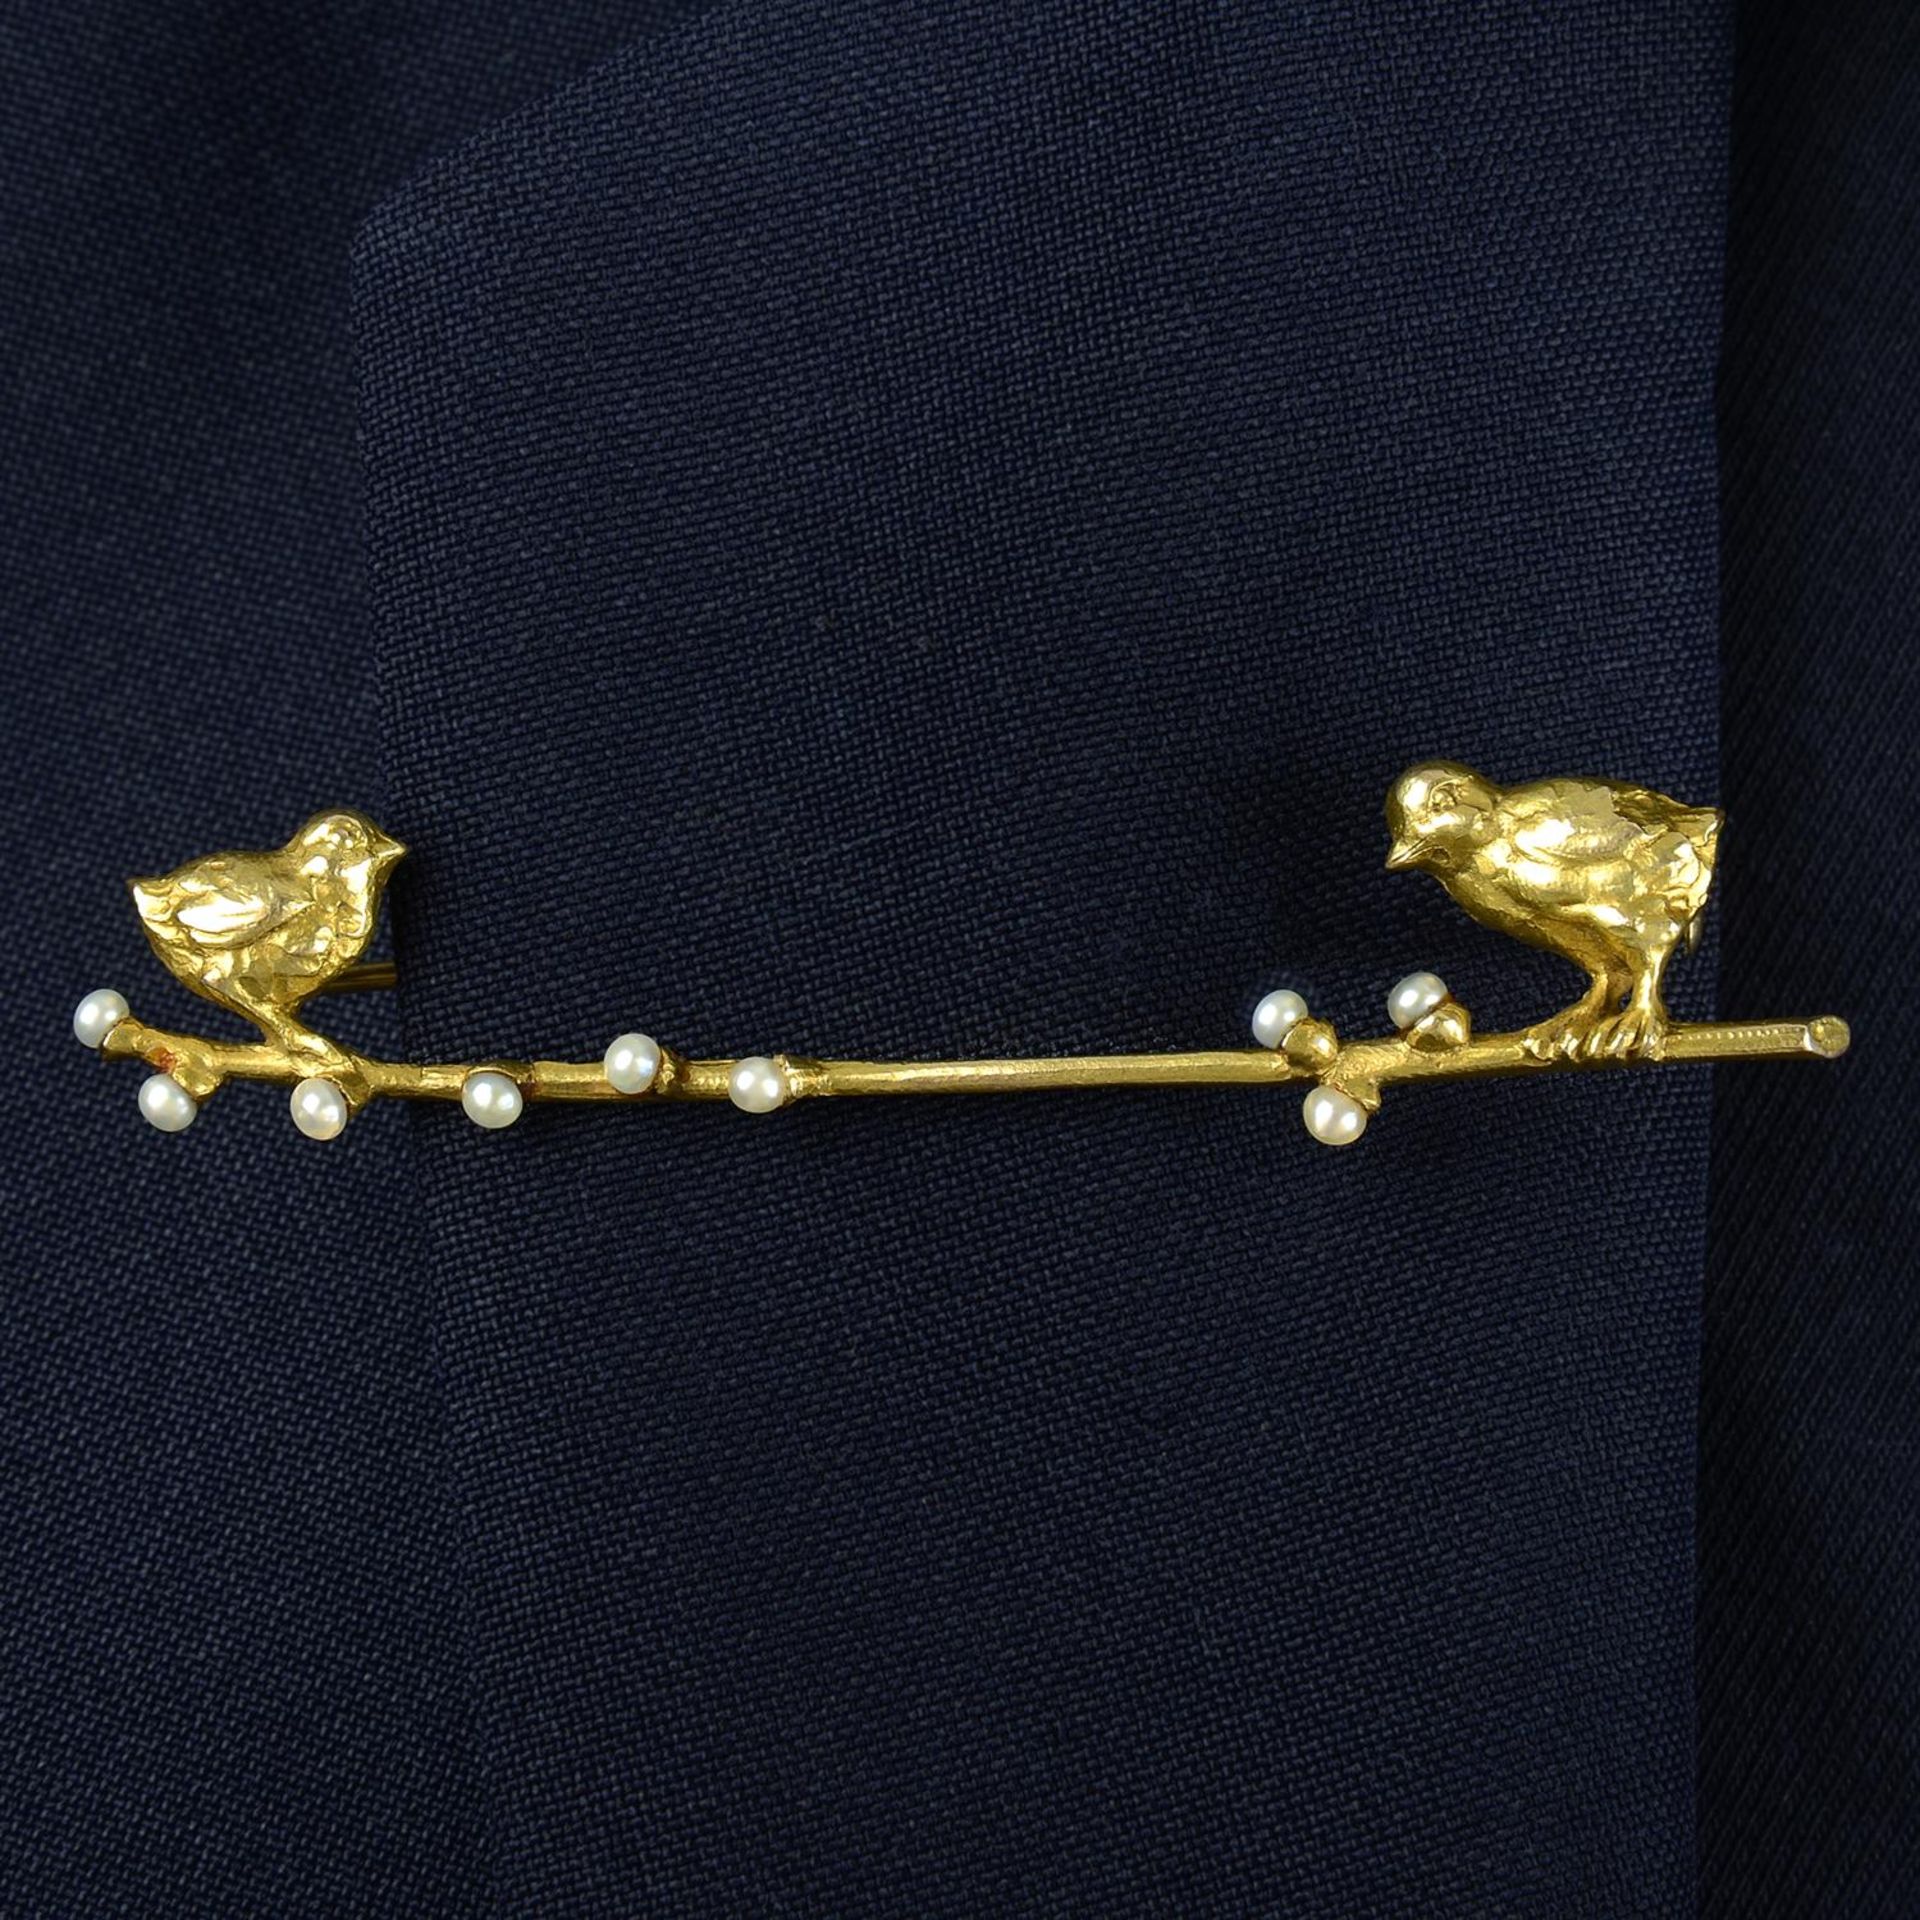 An early 20th century Austrian 14ct gold brooch, depicting two chicks upon a seed pearl budding